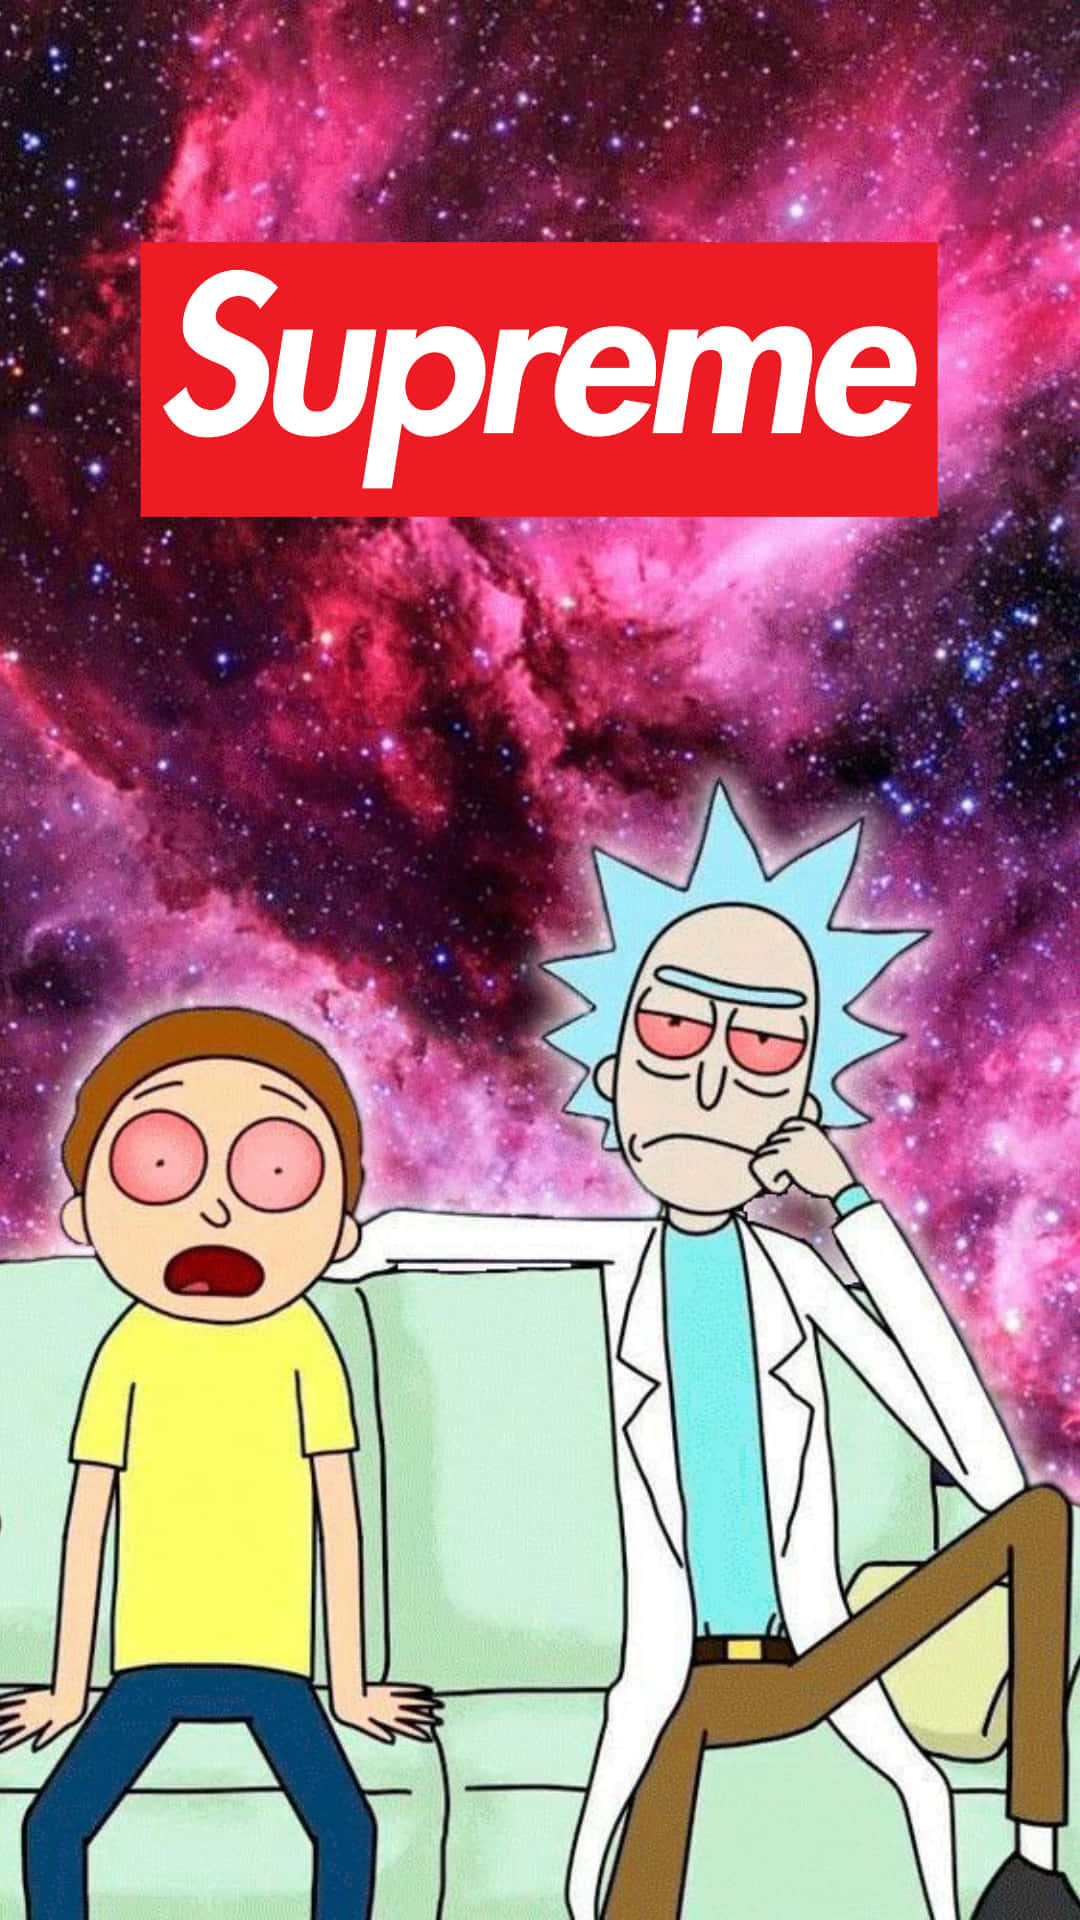 Rick And Morty Aesthetic Art Free Wallpaper download  Download Free Rick  And Morty Aesthetic Art HD Wallpapers to your mobile phone or tablet